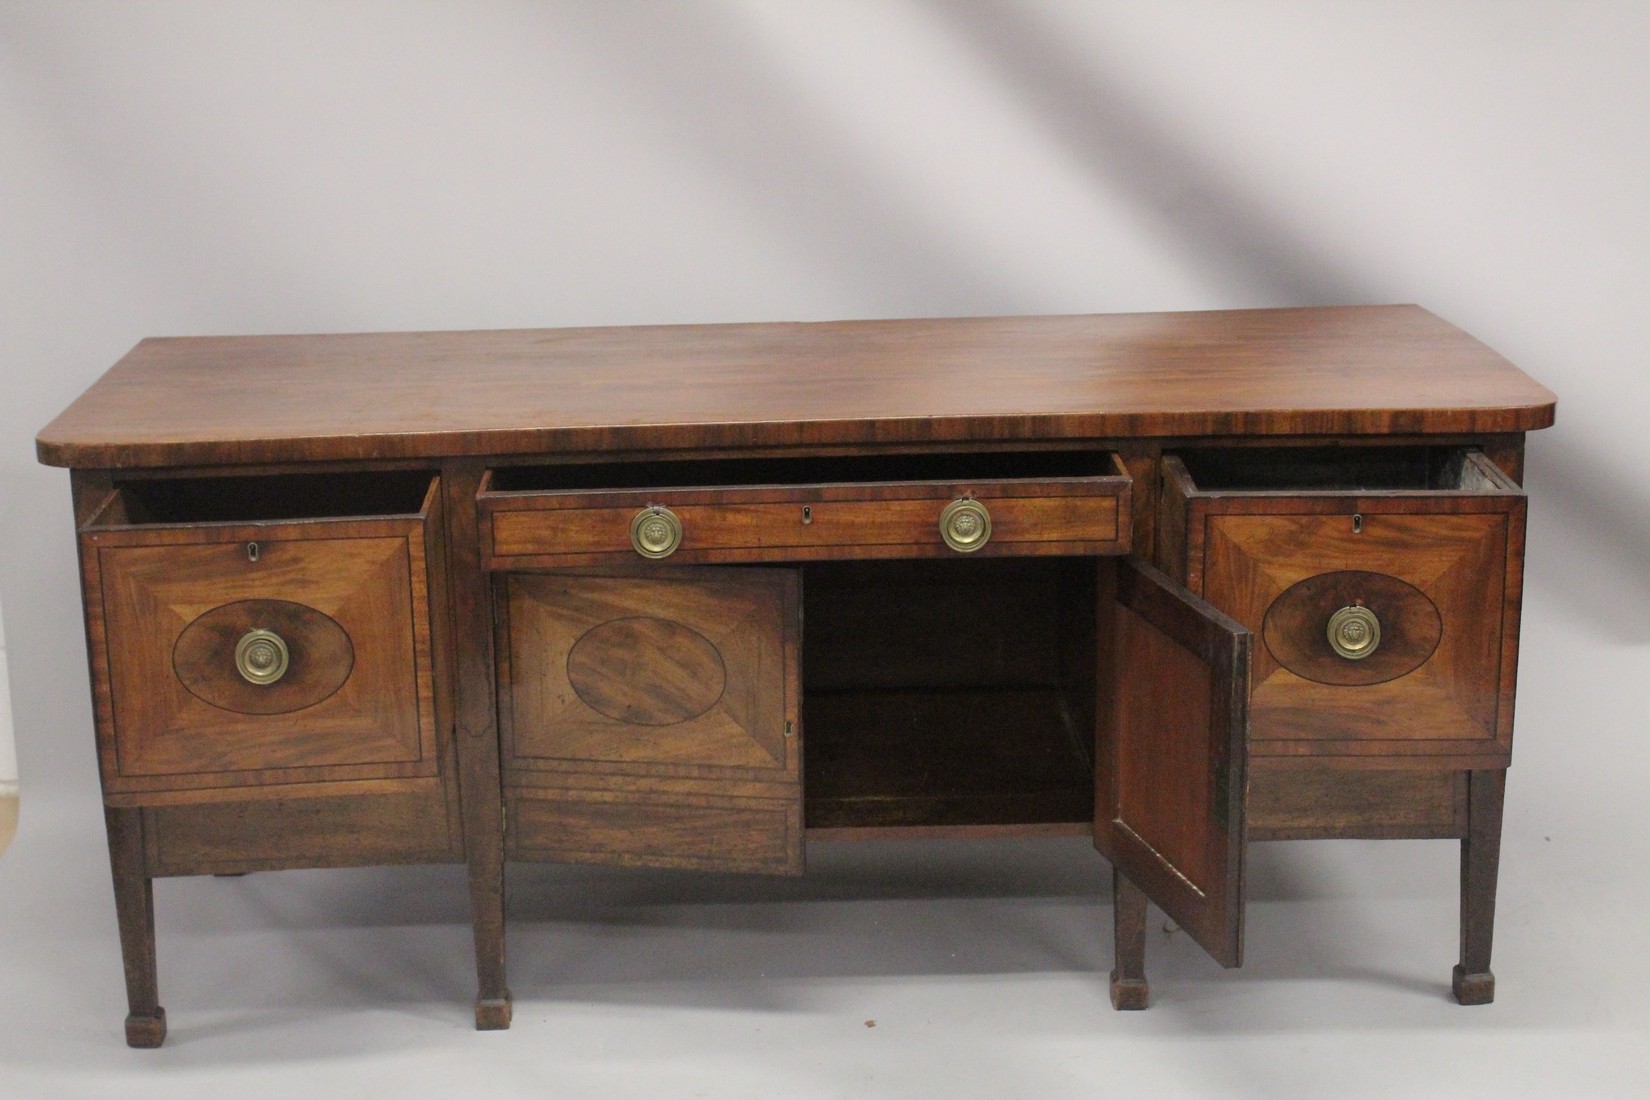 A GOOD GEORGE III MAHOGANY STRAIGHT FRONTED SIDEBOARD with plain legs and ovals to the front, with - Image 2 of 6